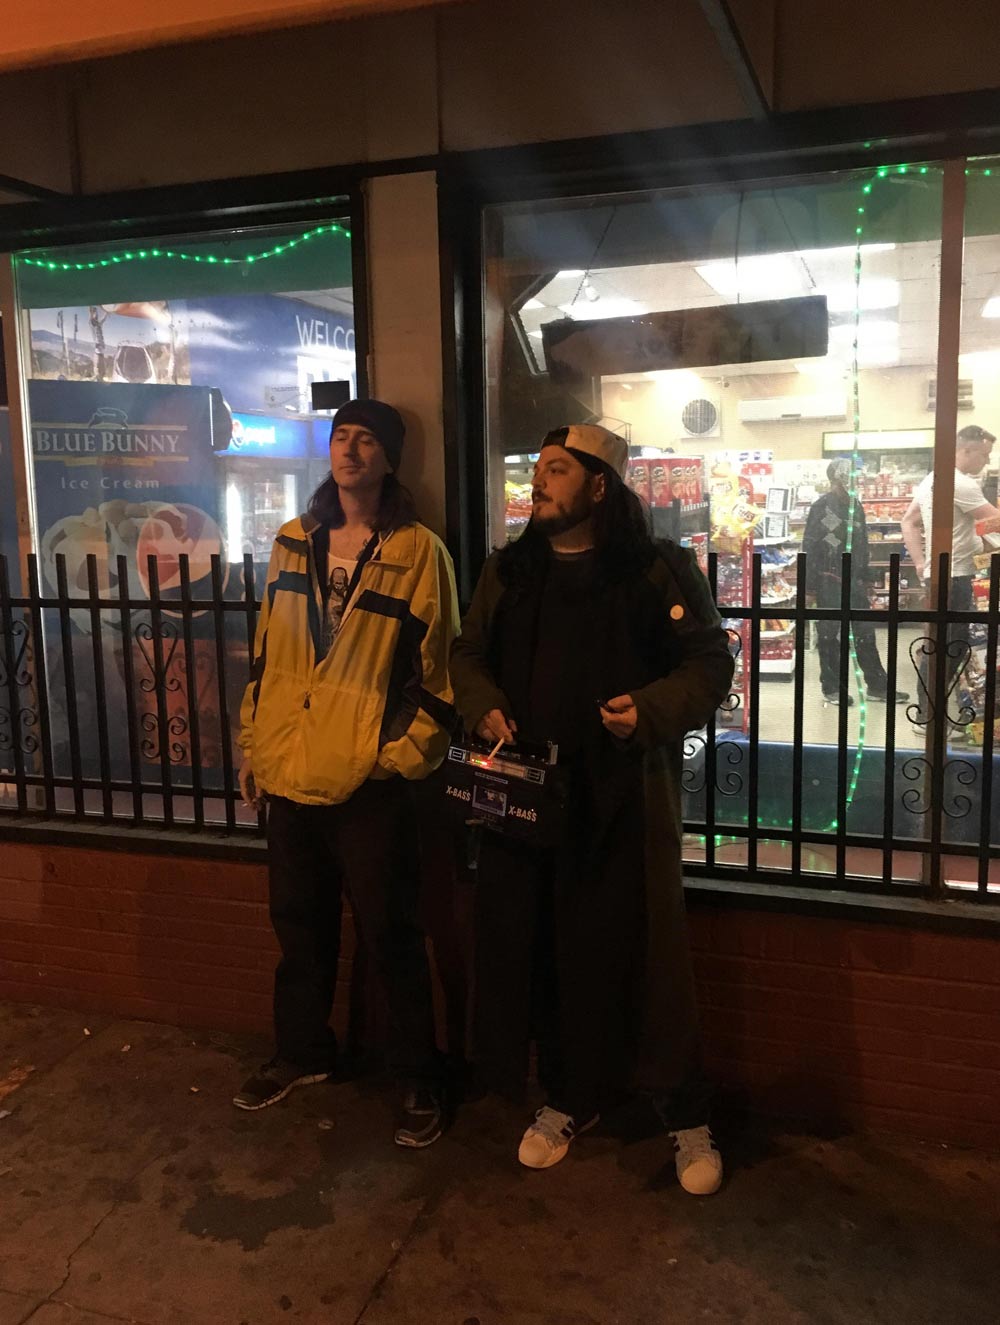 These dudes dressed up like Jay and Silent Bob and hung out in front of ...